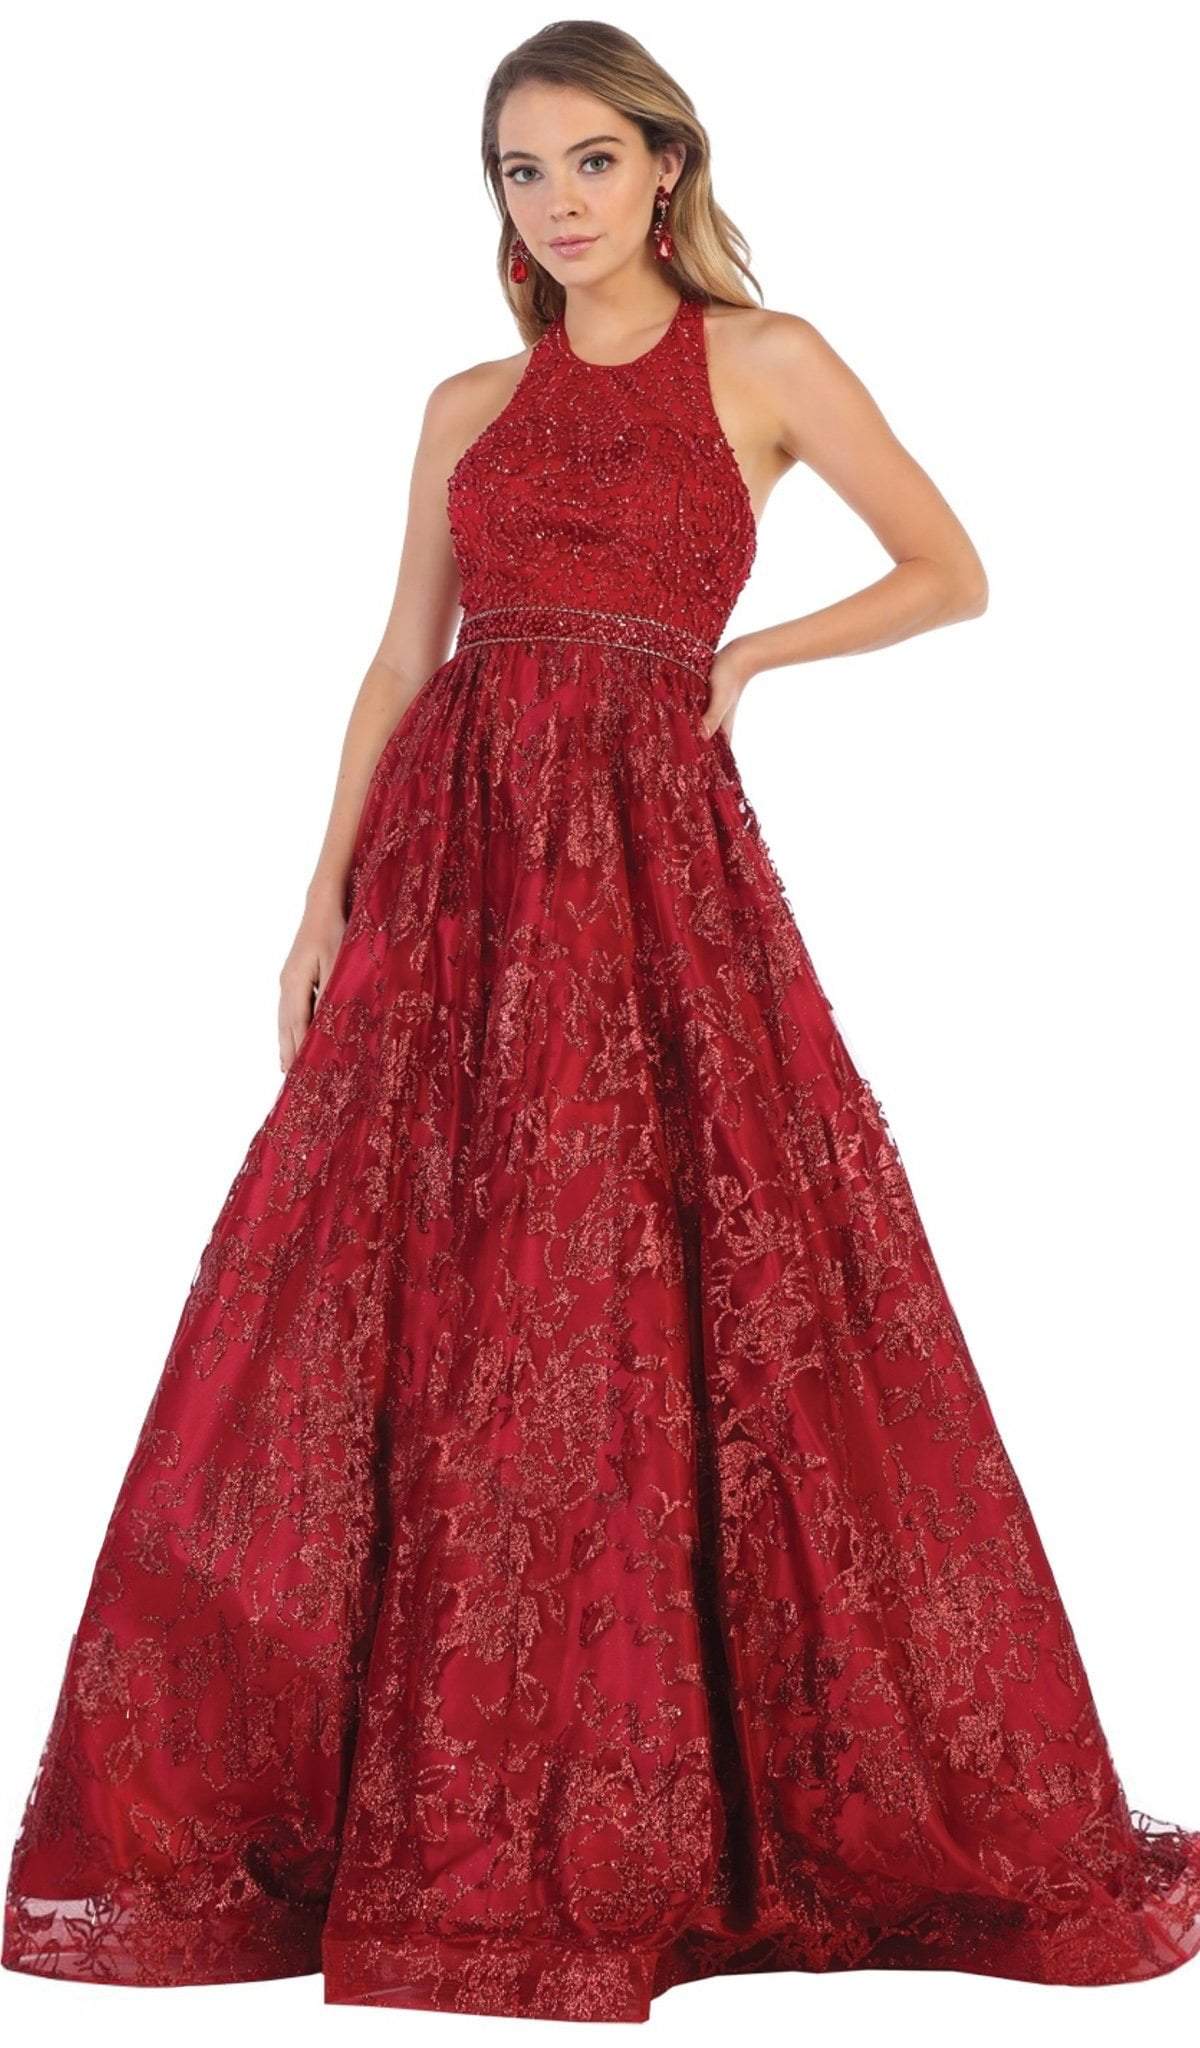 May Queen - RQ7707 Embellished Halter Neck Ballgown With Open Back Special Occasion Dress 4 / Burgundy